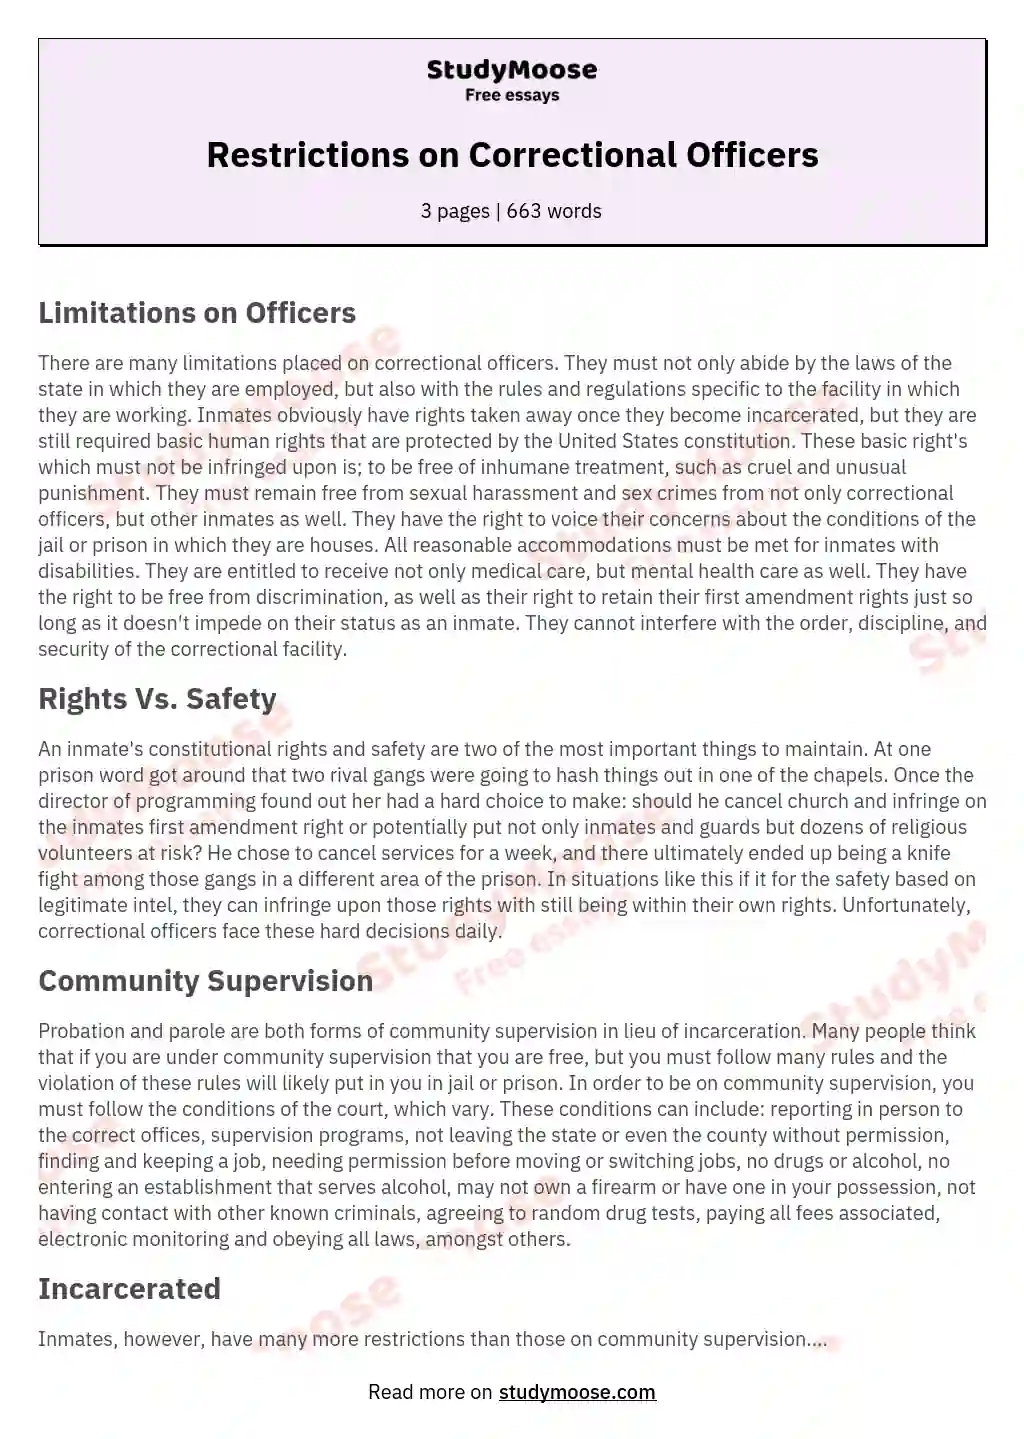 Restrictions on Correctional Officers essay